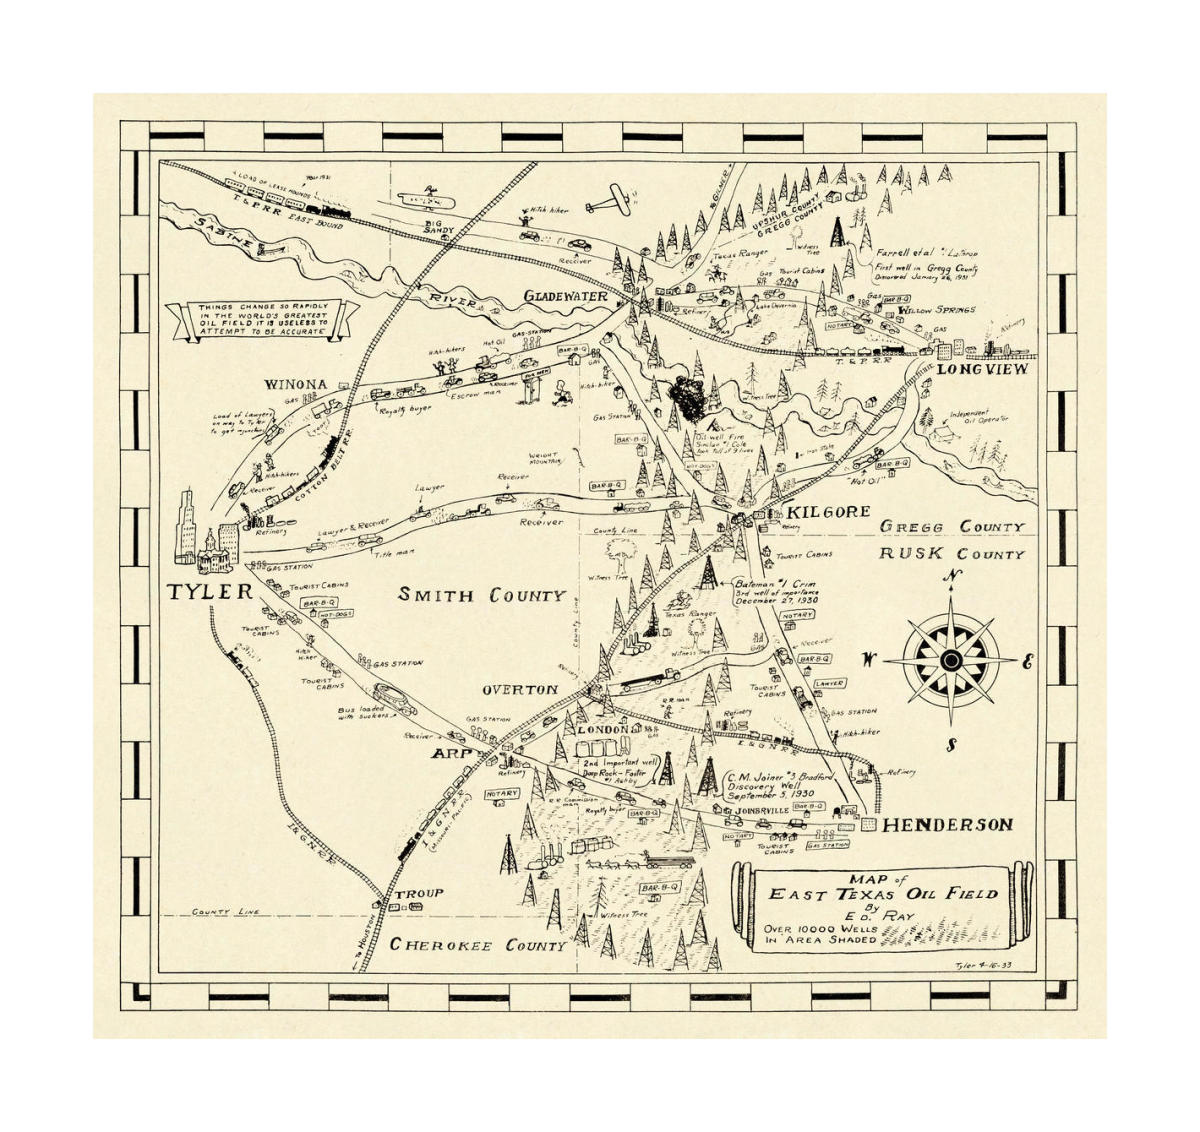 Map Of Texas Oil Fields E.D. Ray Map of East Texas Oil Field, 1933 | Bullock Museum Gift Shop